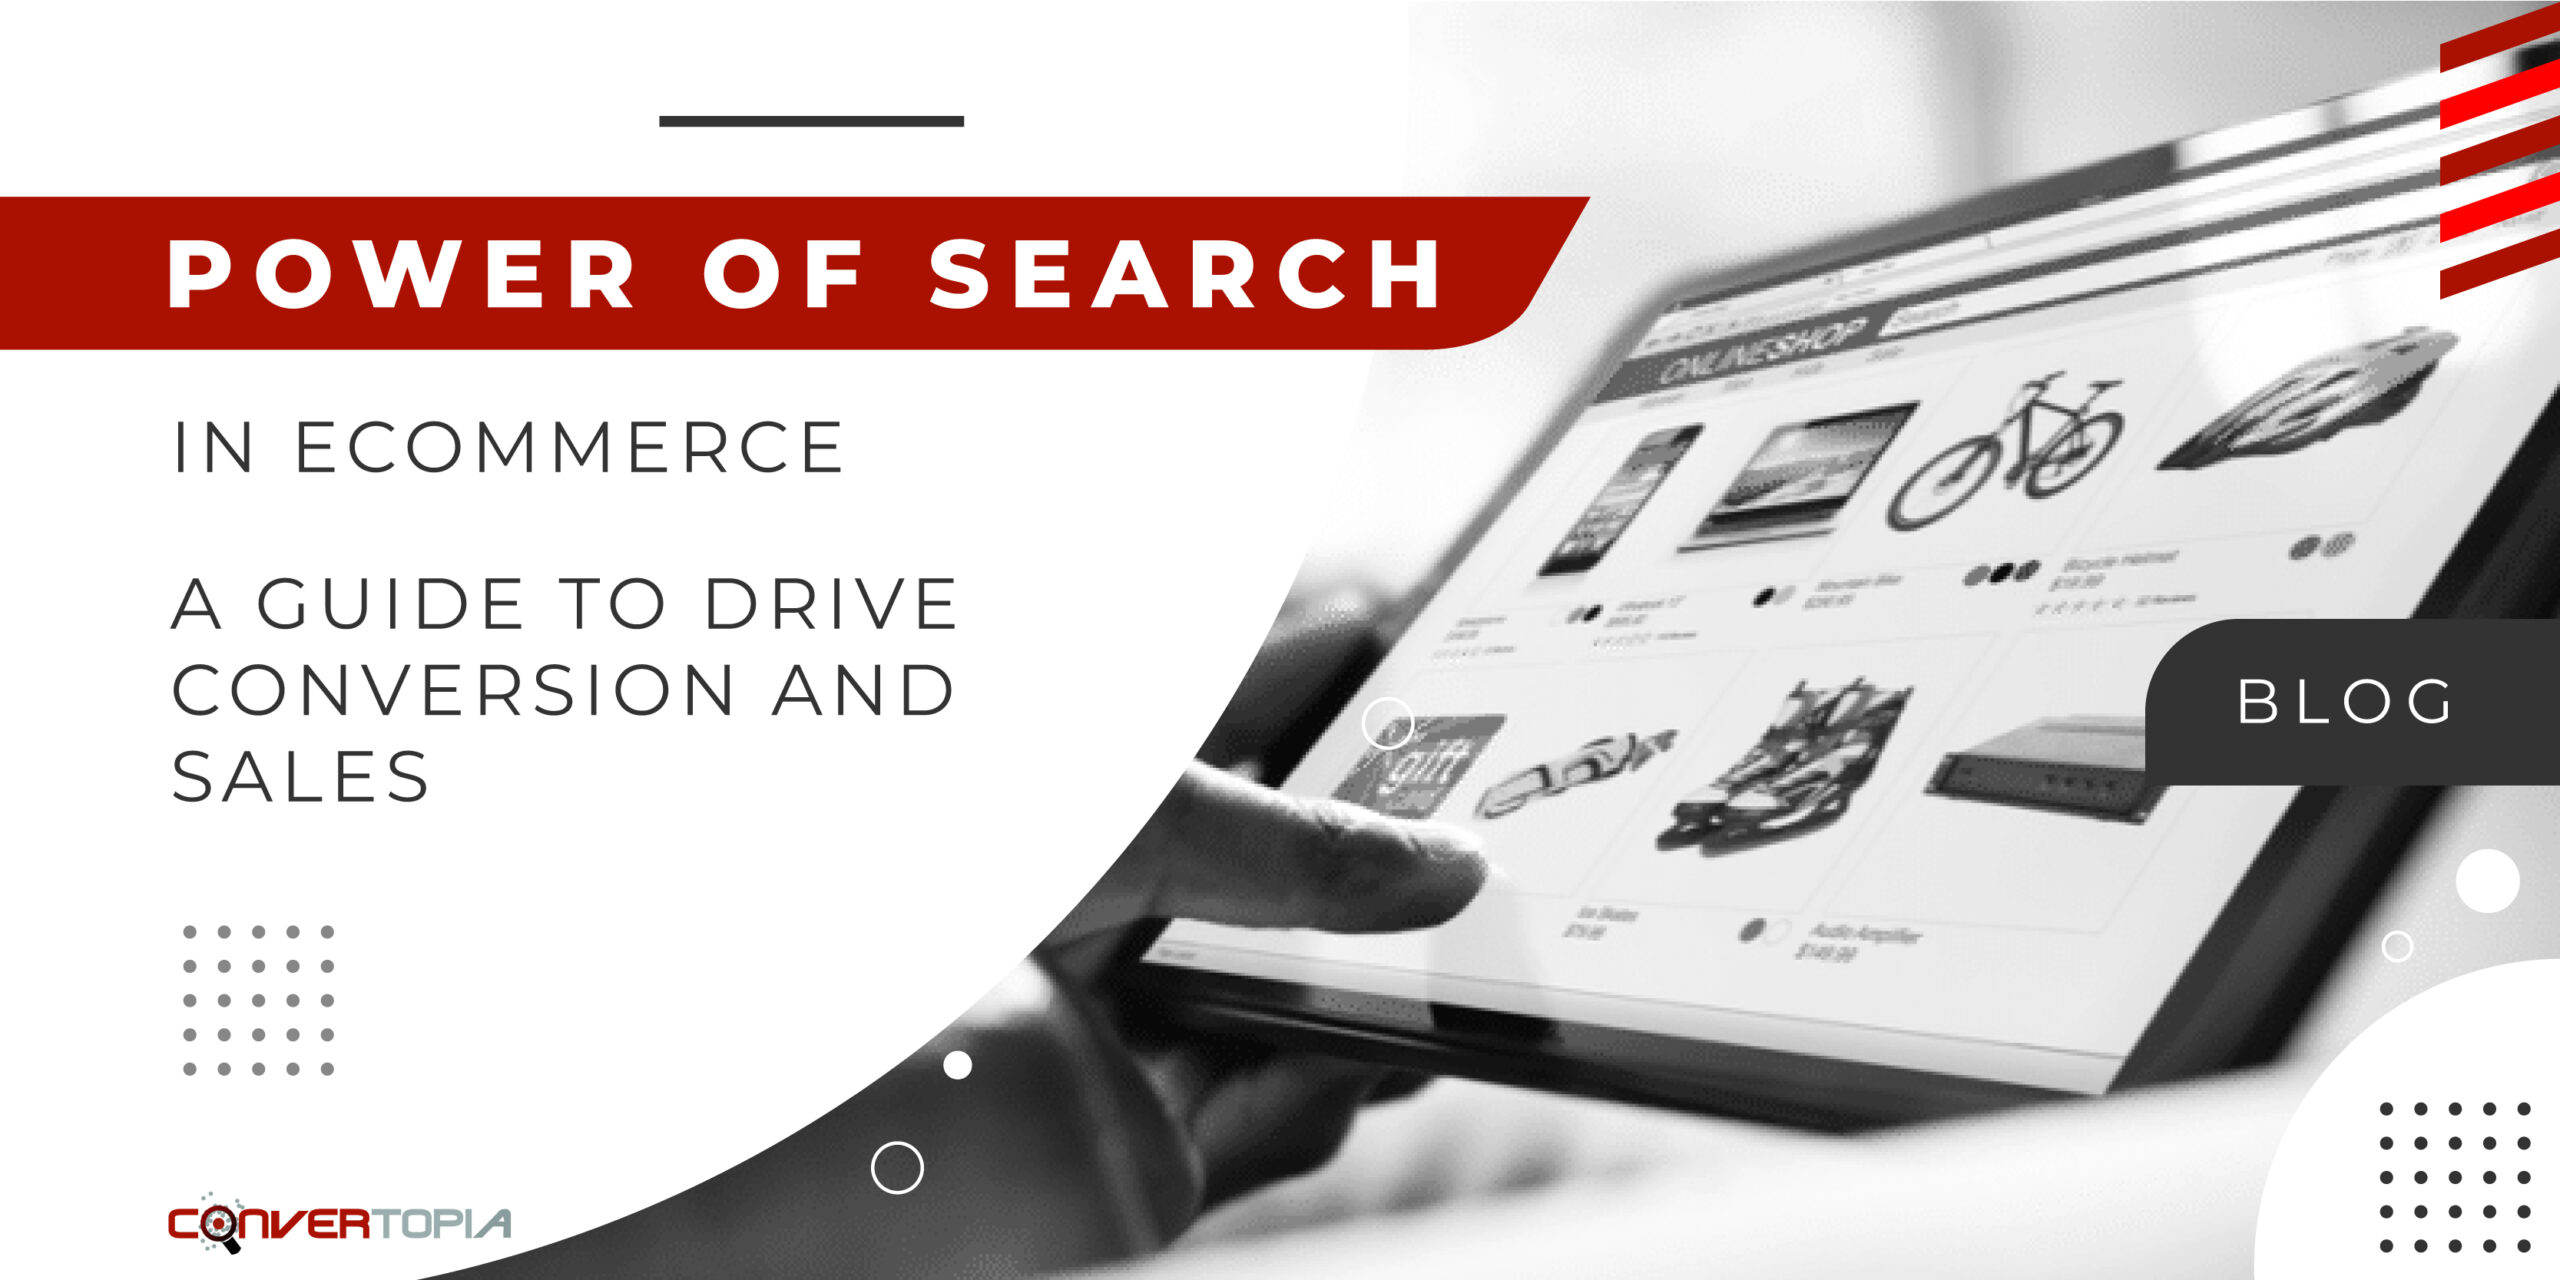 Importance of search in eCommerce for customer conversion and growth